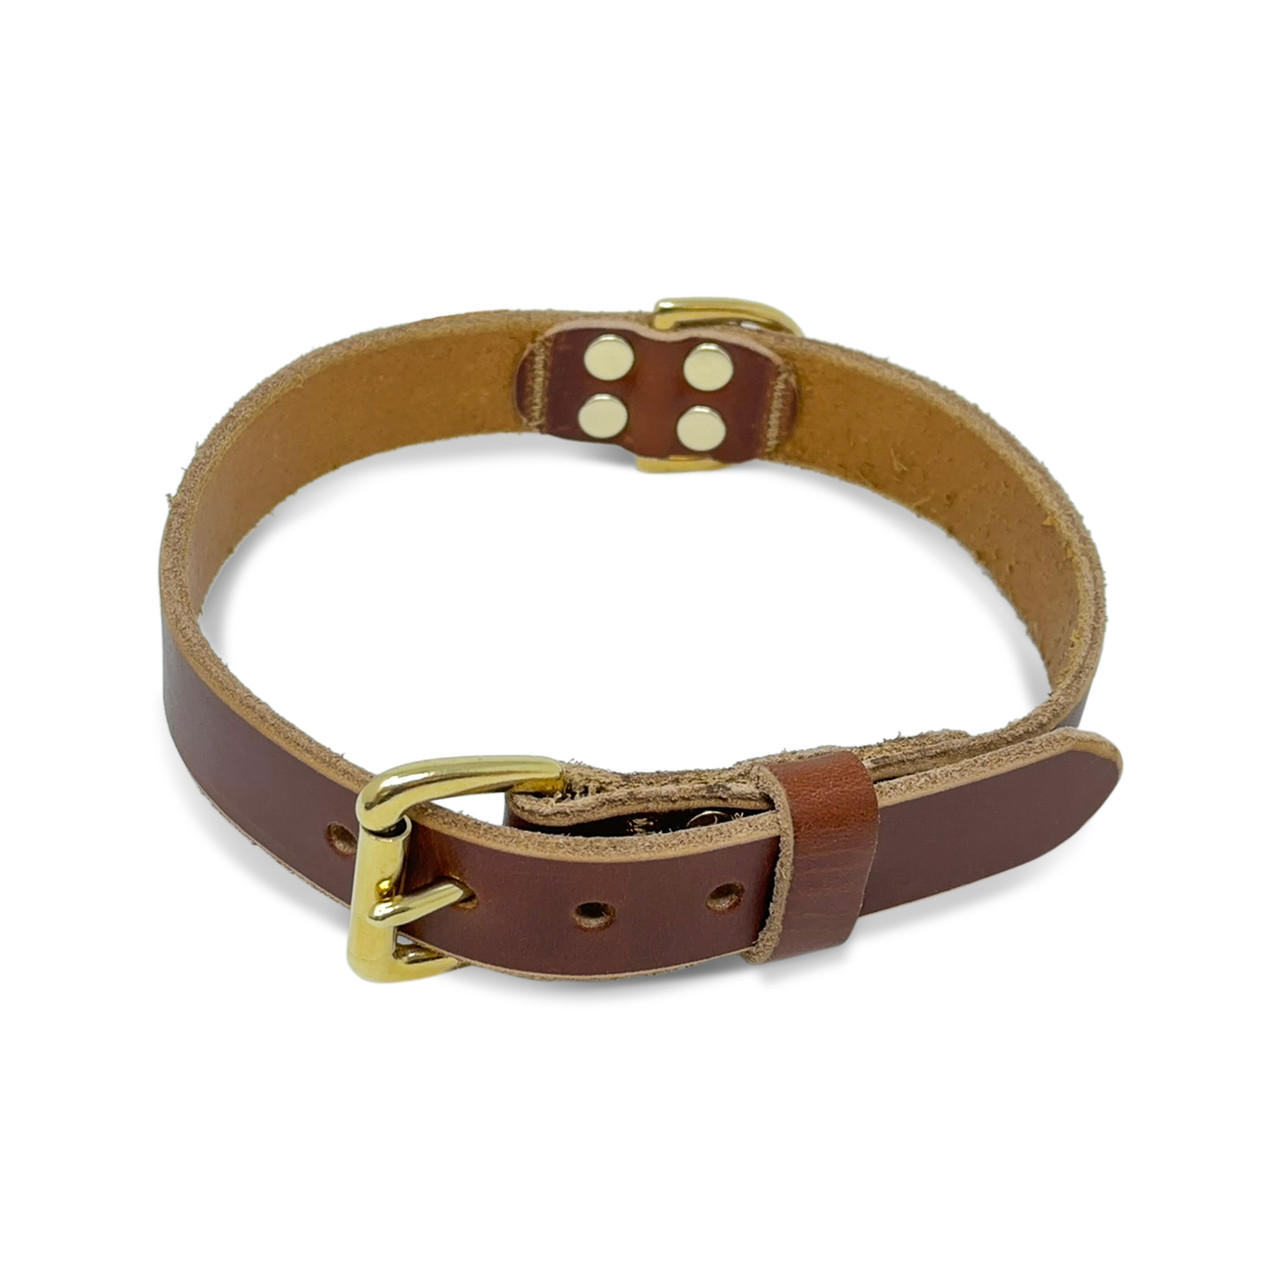 5/8 Leather Dog Collar Double Stitched Solid Brass Hardware